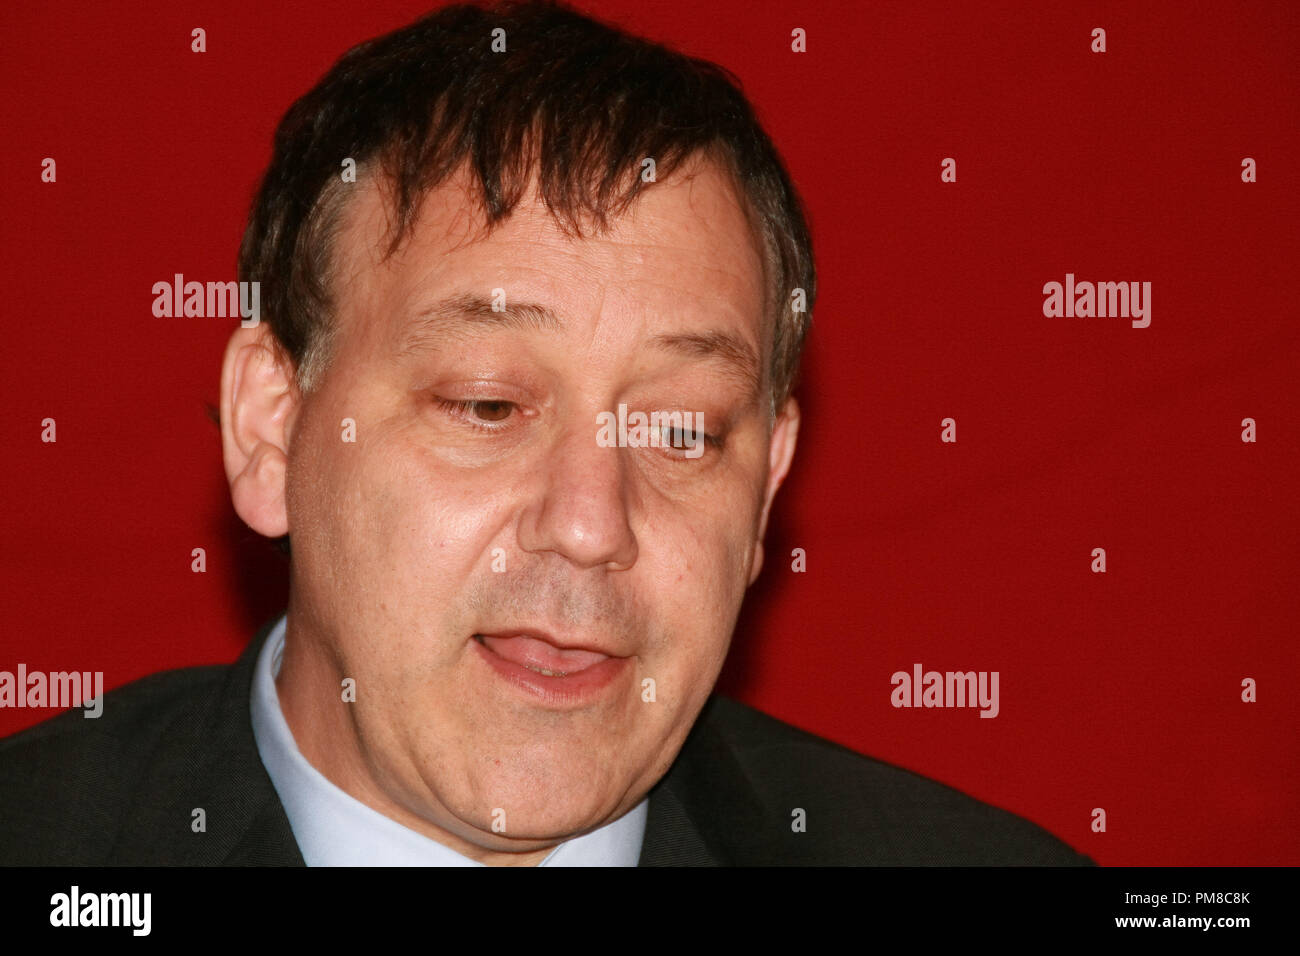 Sam Raimi Portrait 'OZ the Great and Powerful' Portrait Session, February 15, 2013.  Reproduction by American tabloids is absolutely forbidden. File Reference # 31843 036JRC  For Editorial Use Only -  All Rights Reserved Stock Photo